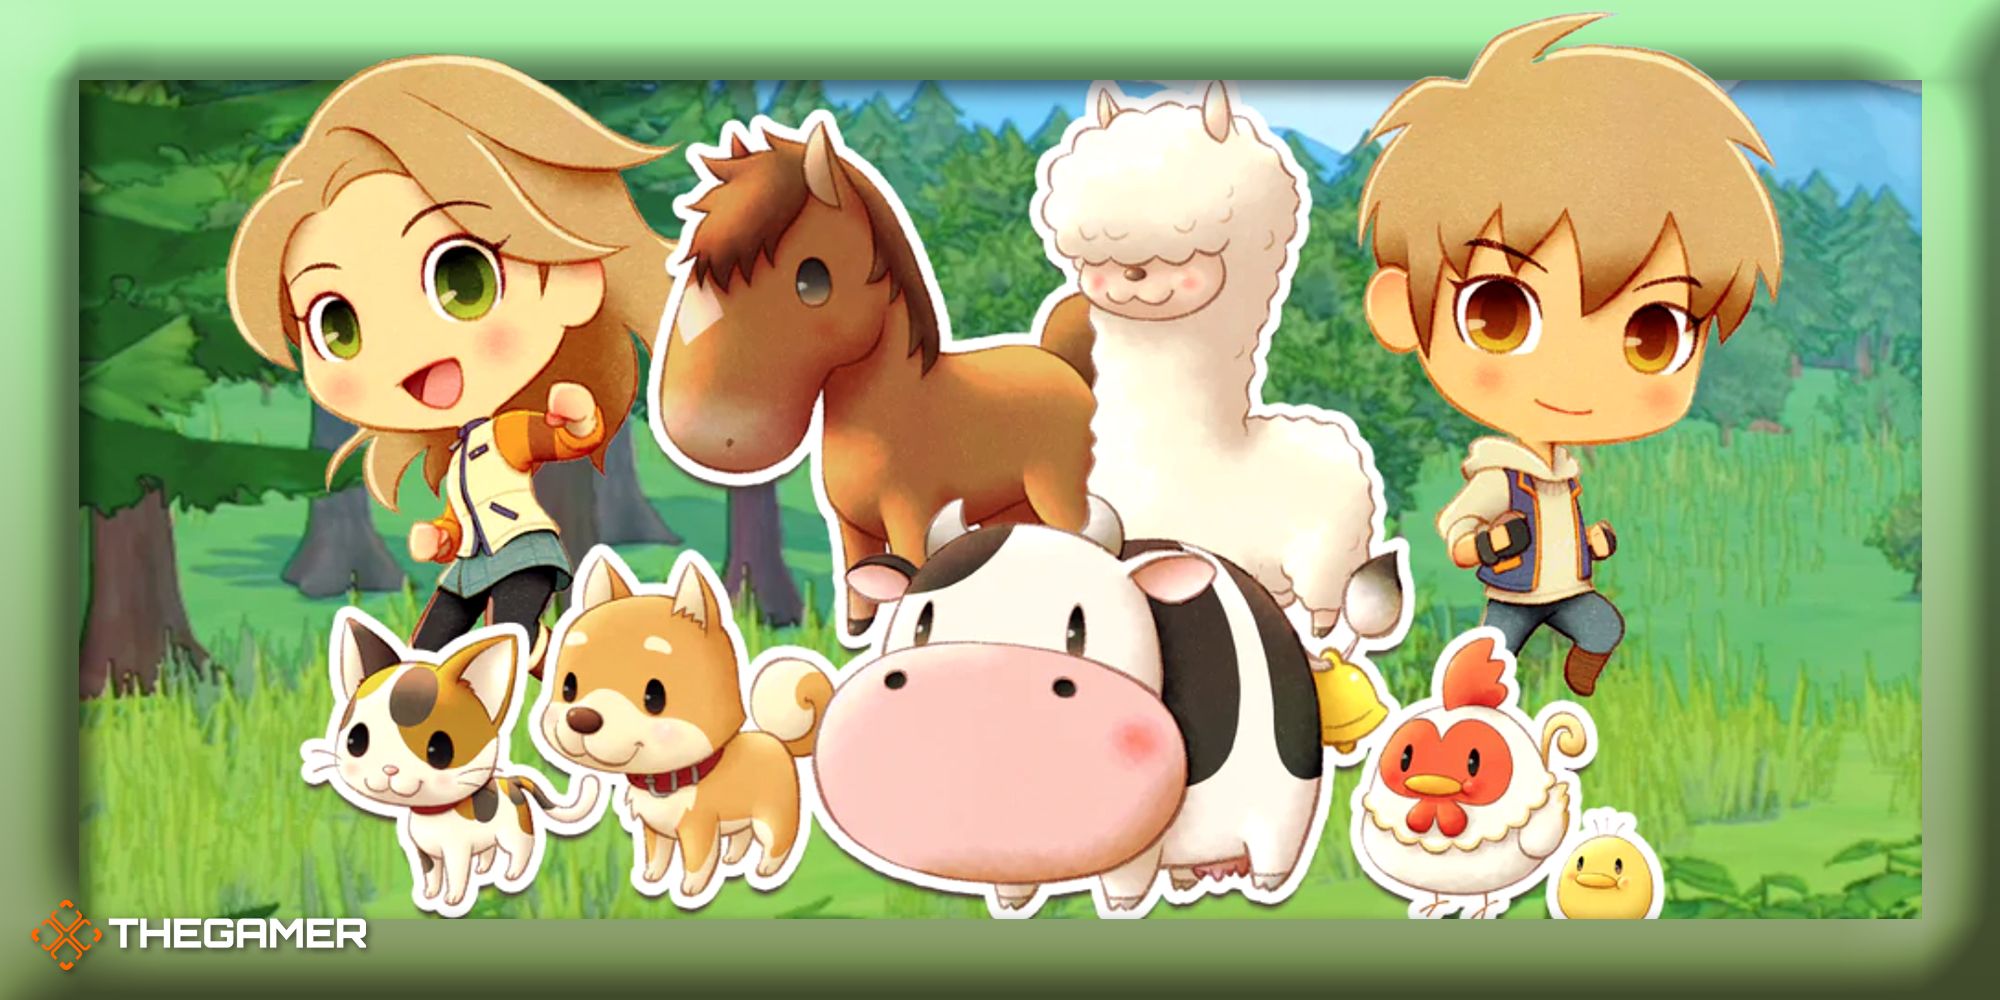 Key artwork from Story Of Seasons: Pioneers Of Olive Town that depicts the player characters and a range of animals.